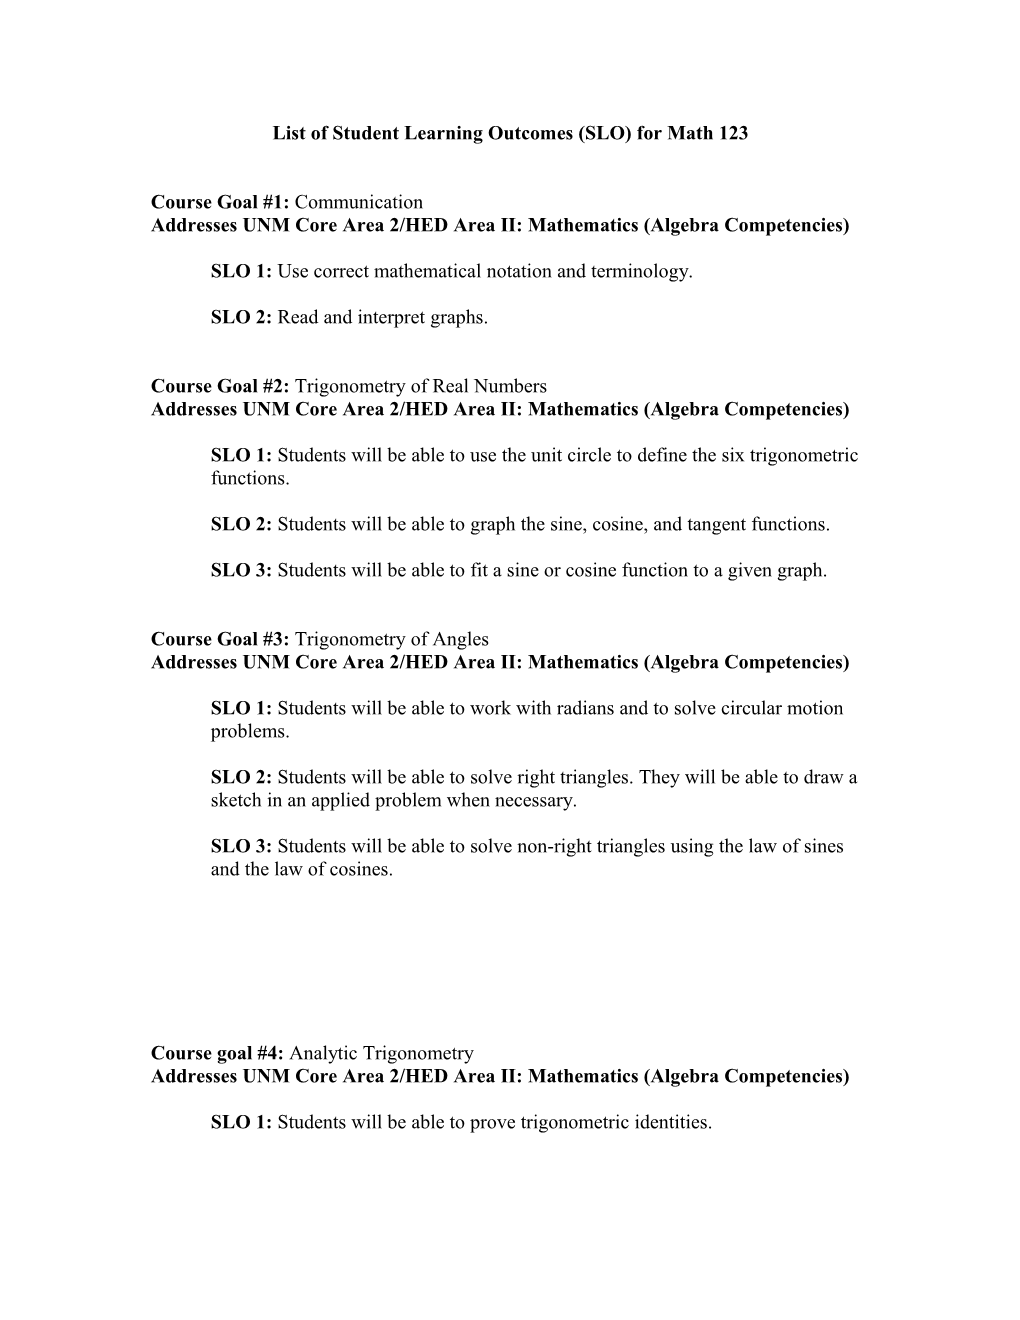 List of Student Learning Outcomes (SLO) for Math 123